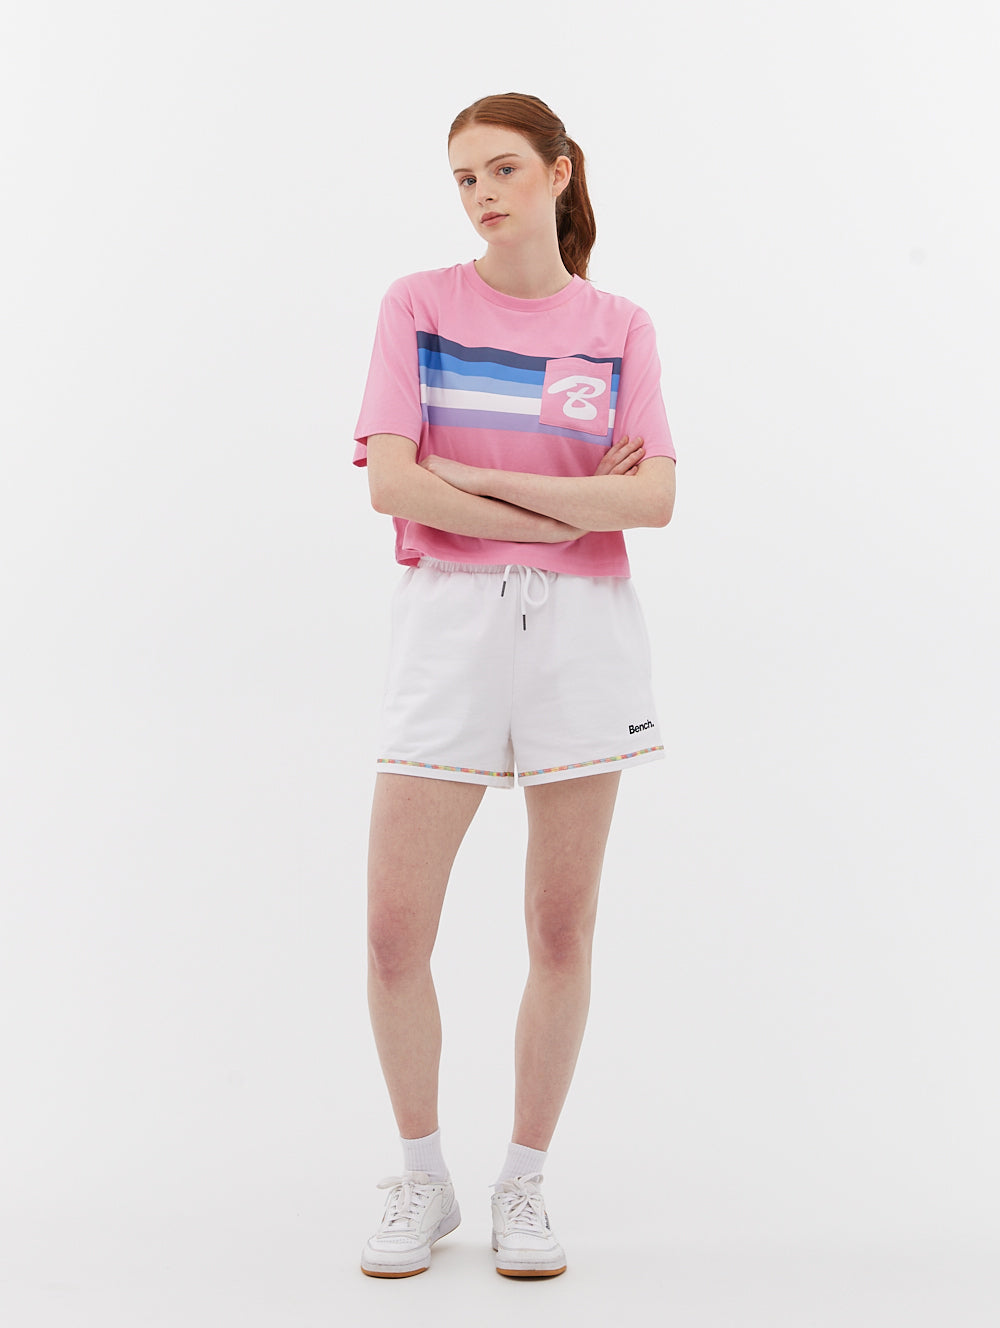 Jersey Cropped Tee with Initial Pocket - BLGH10451M